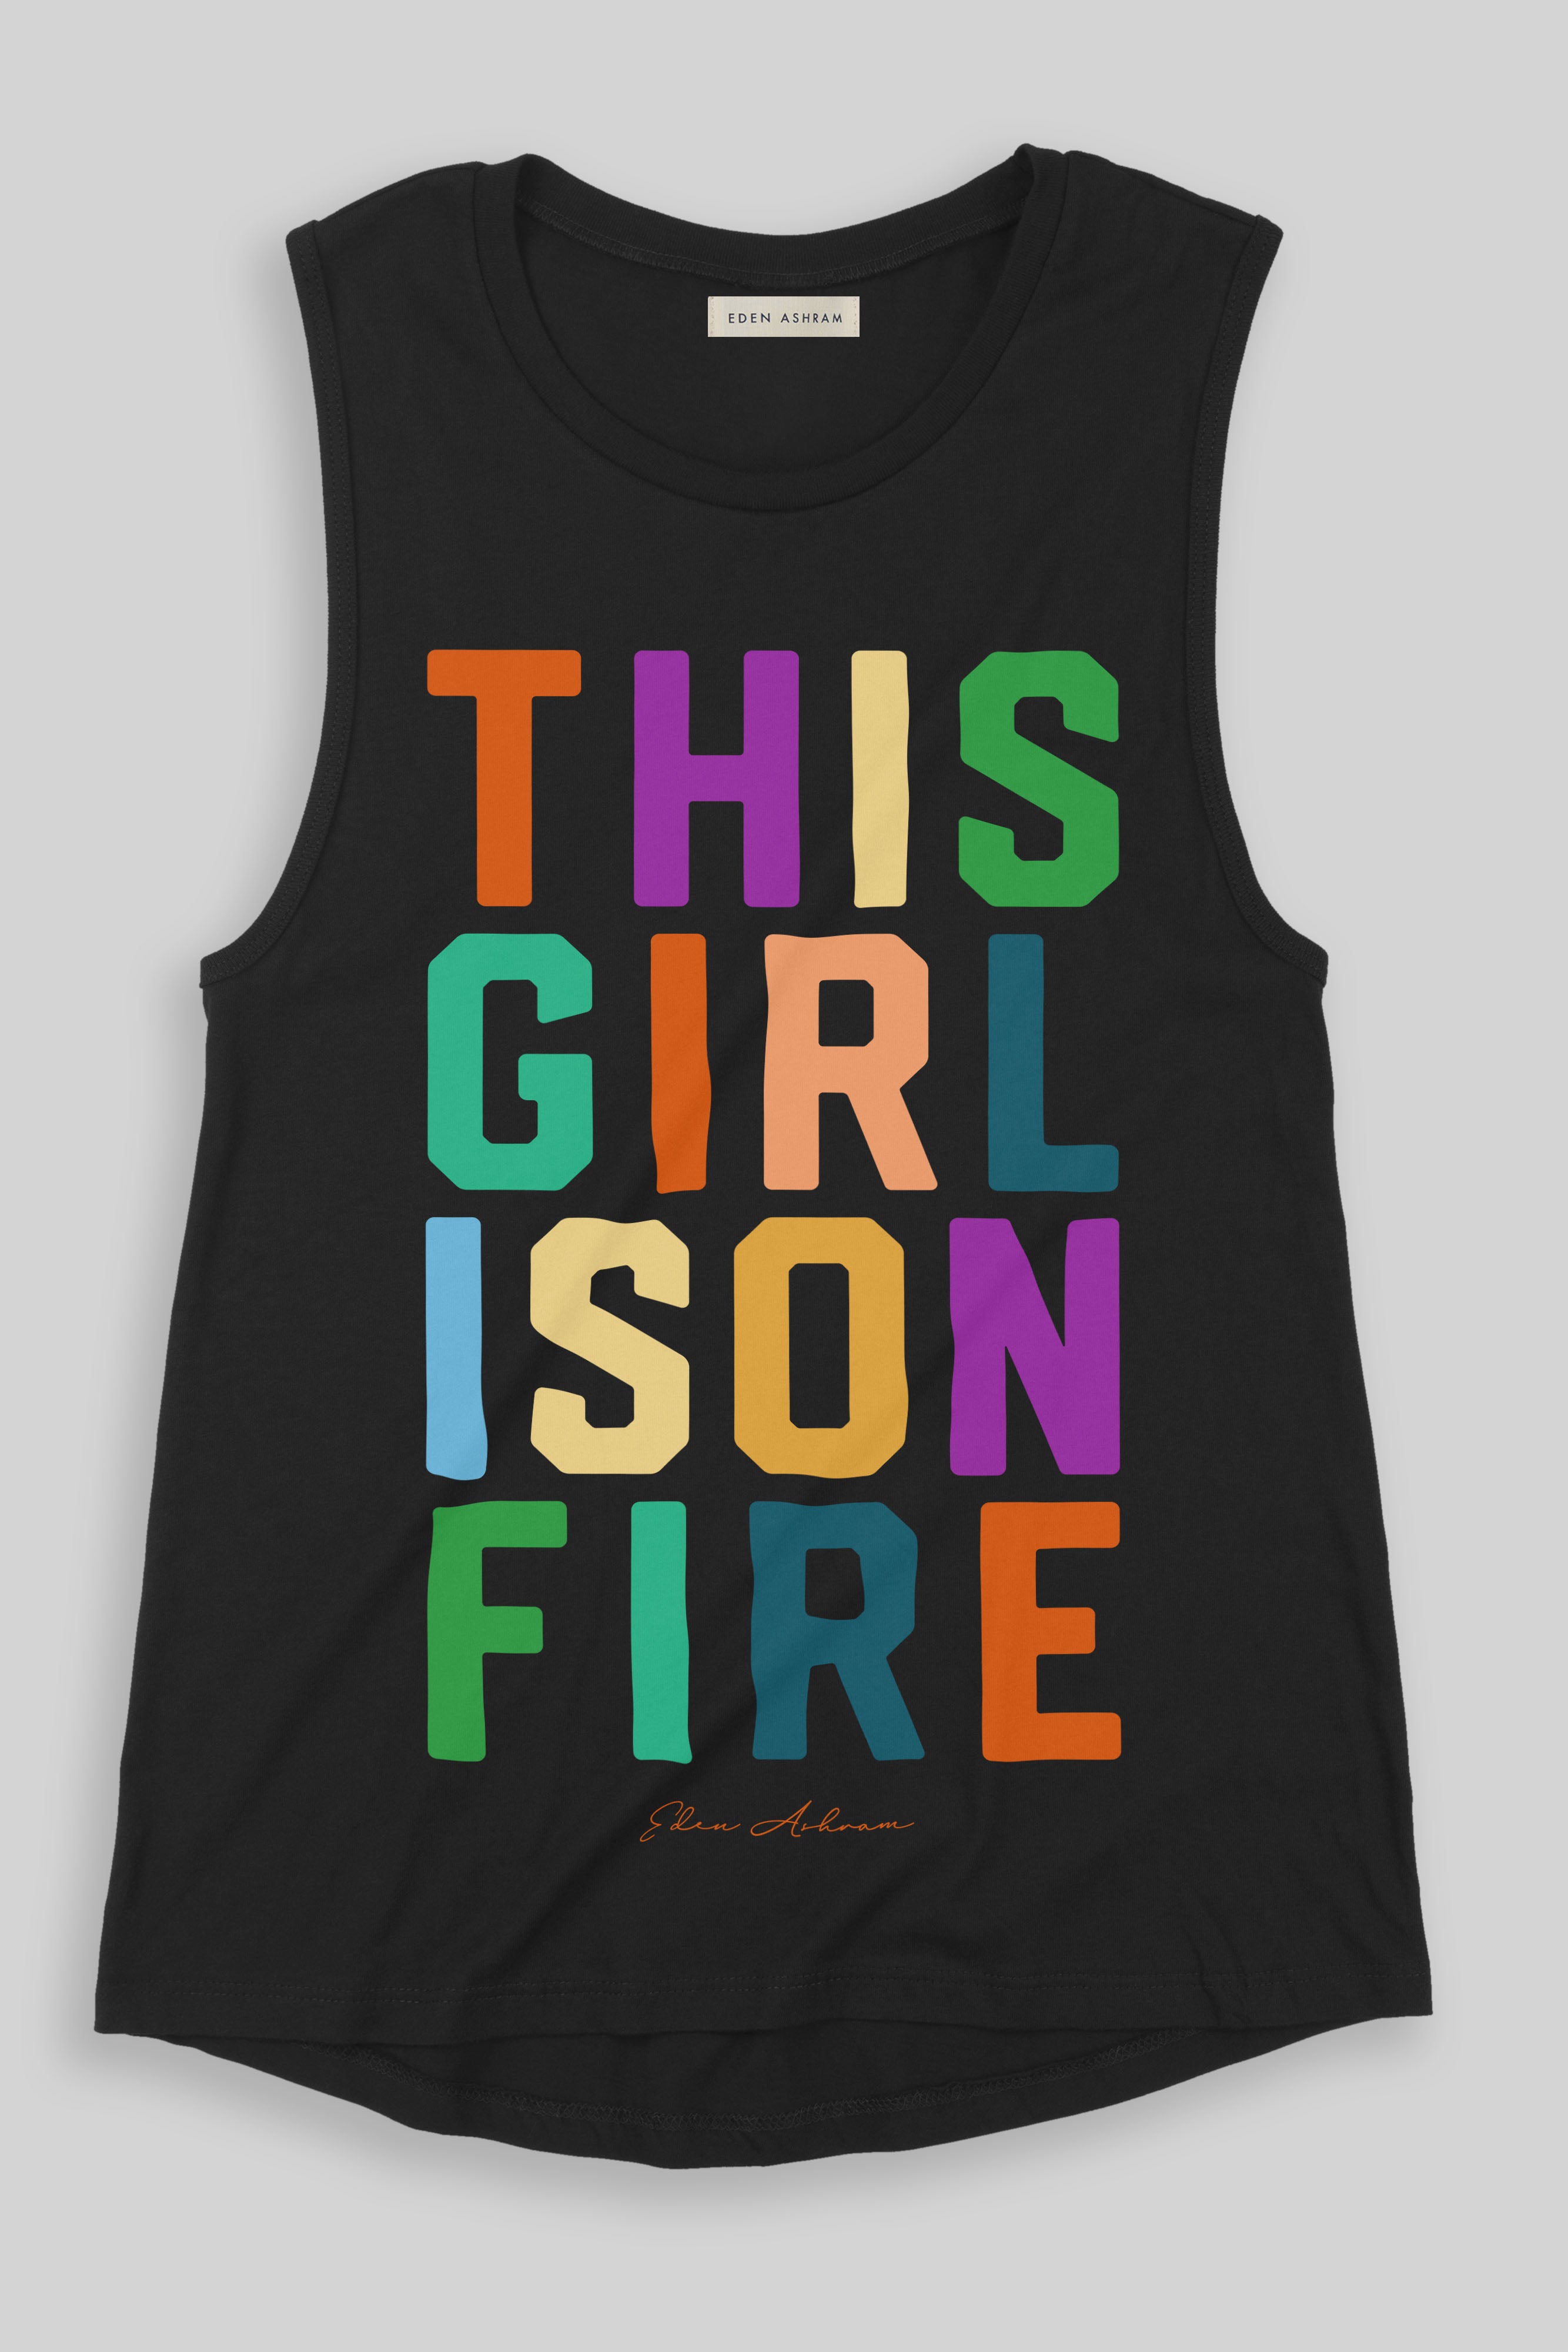 EDEN ASHRAM This Girl Is On Fire Jersey Muscle Tank Black